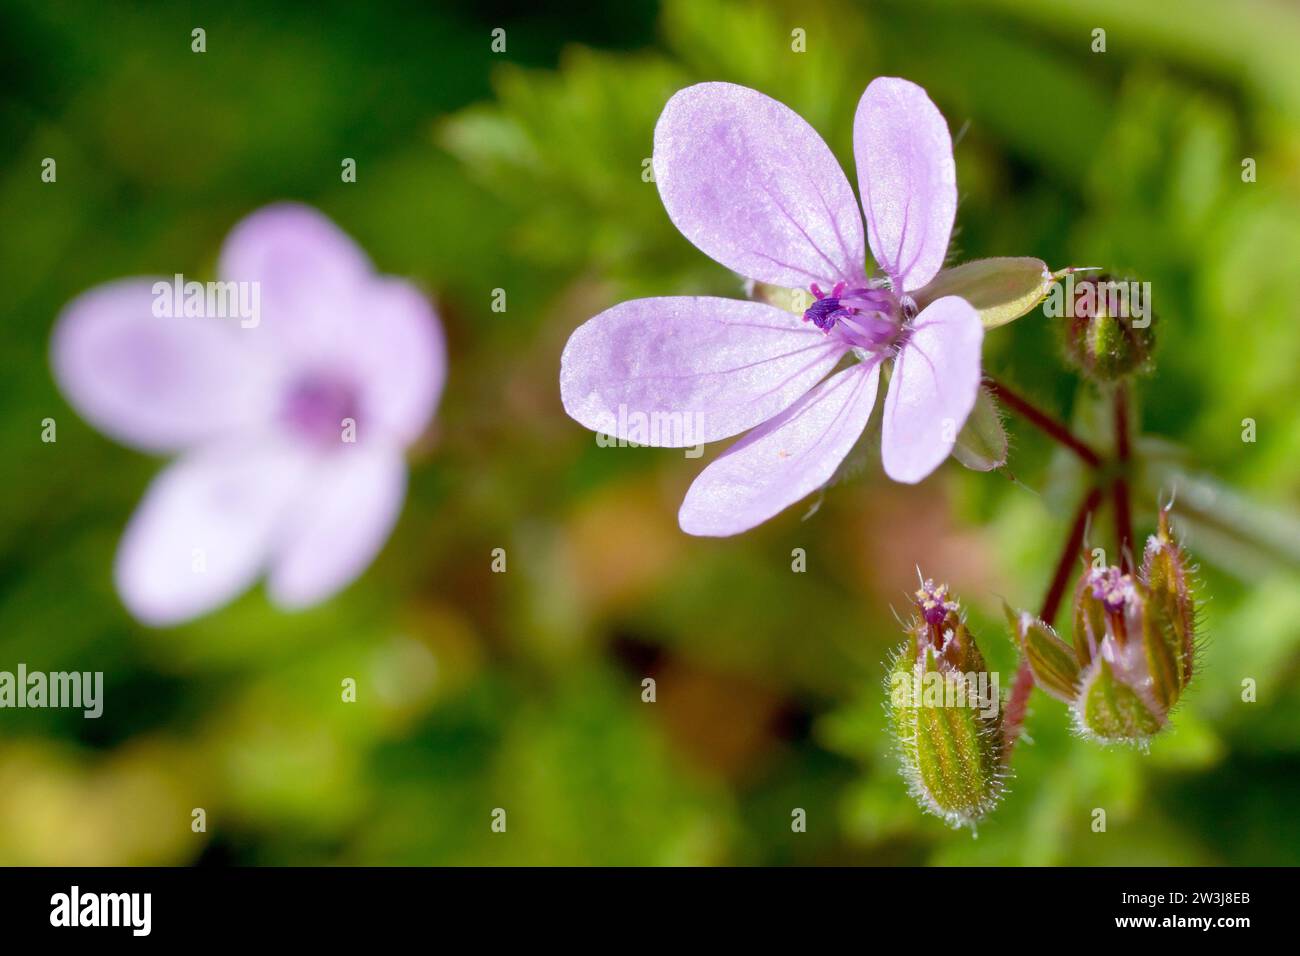 Common Storksbill (erodium cicutarium), close up focusing on a single pink flower with developing seedpods, isolated from the background. Stock Photo